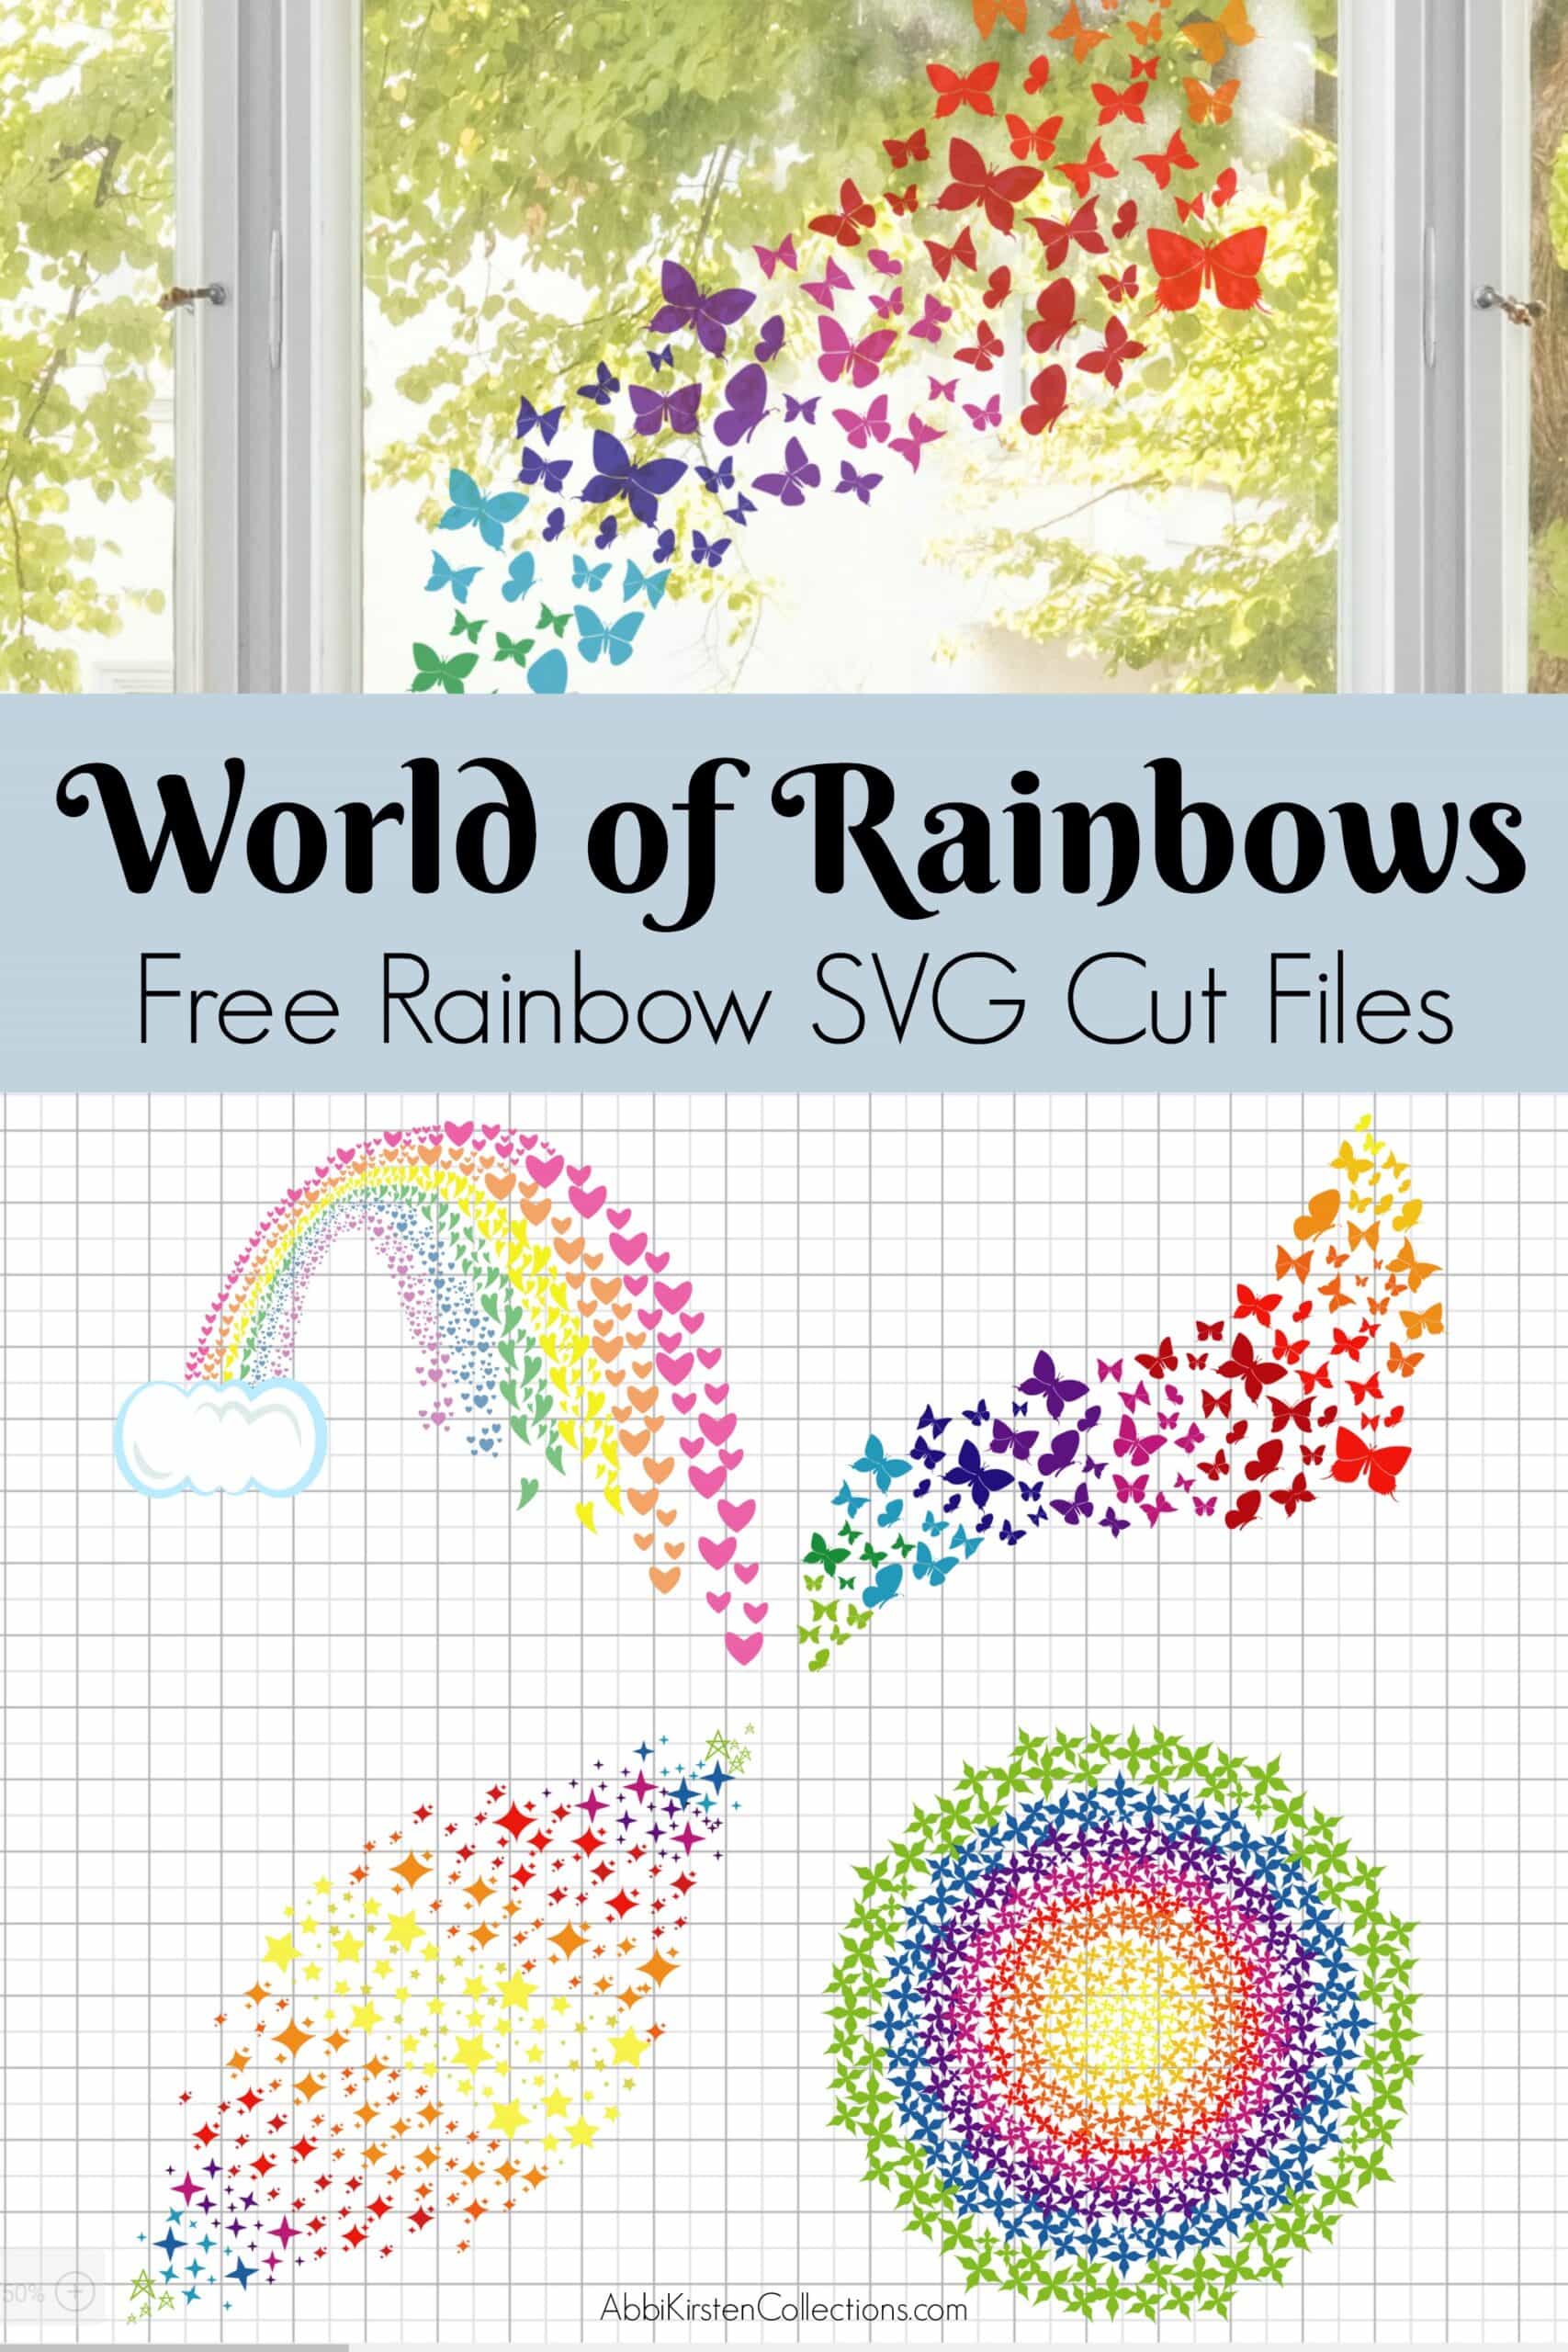 A collage of stacked images shows  a collection of different rainbow SVG files on the grid canvas in Cricut design space. Image text says "World of Rainbows Free Rainbow SVC Cut Files"